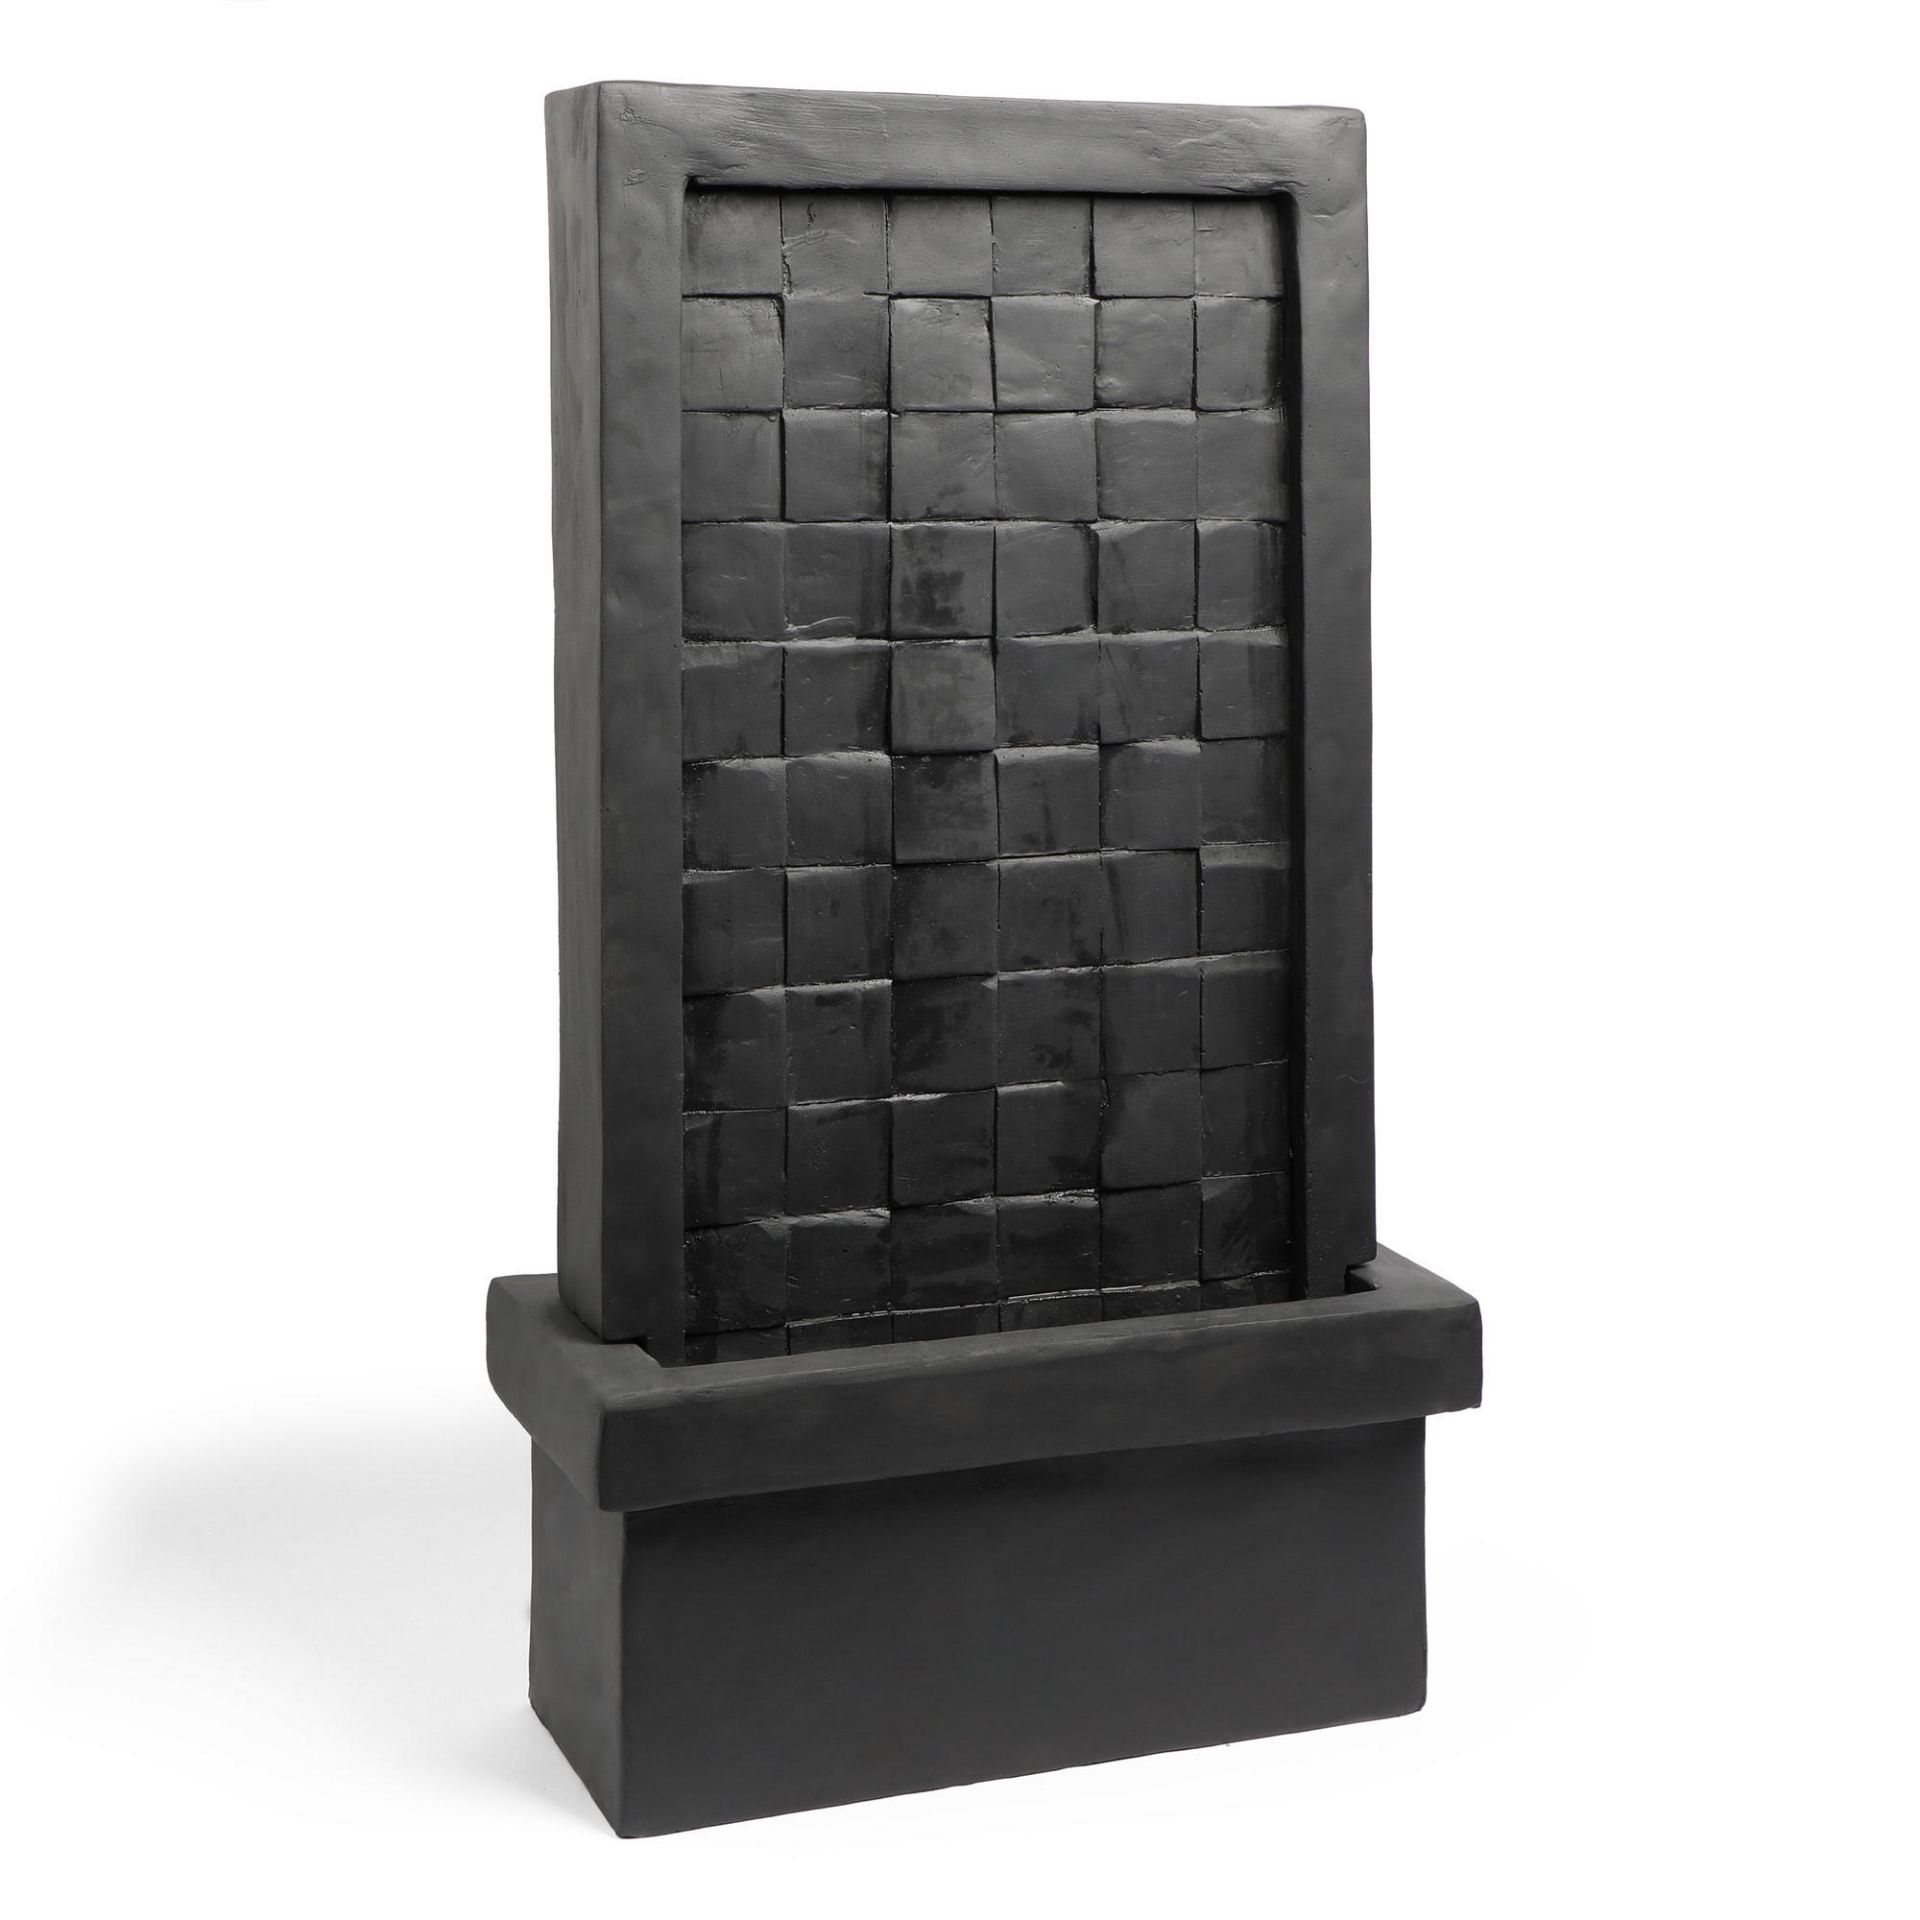 New & Boxed Tiled Waterfall Water Feature - Tall LED Wall Lit Cascading Water Fountain. RRP £349.99. - Image 6 of 6